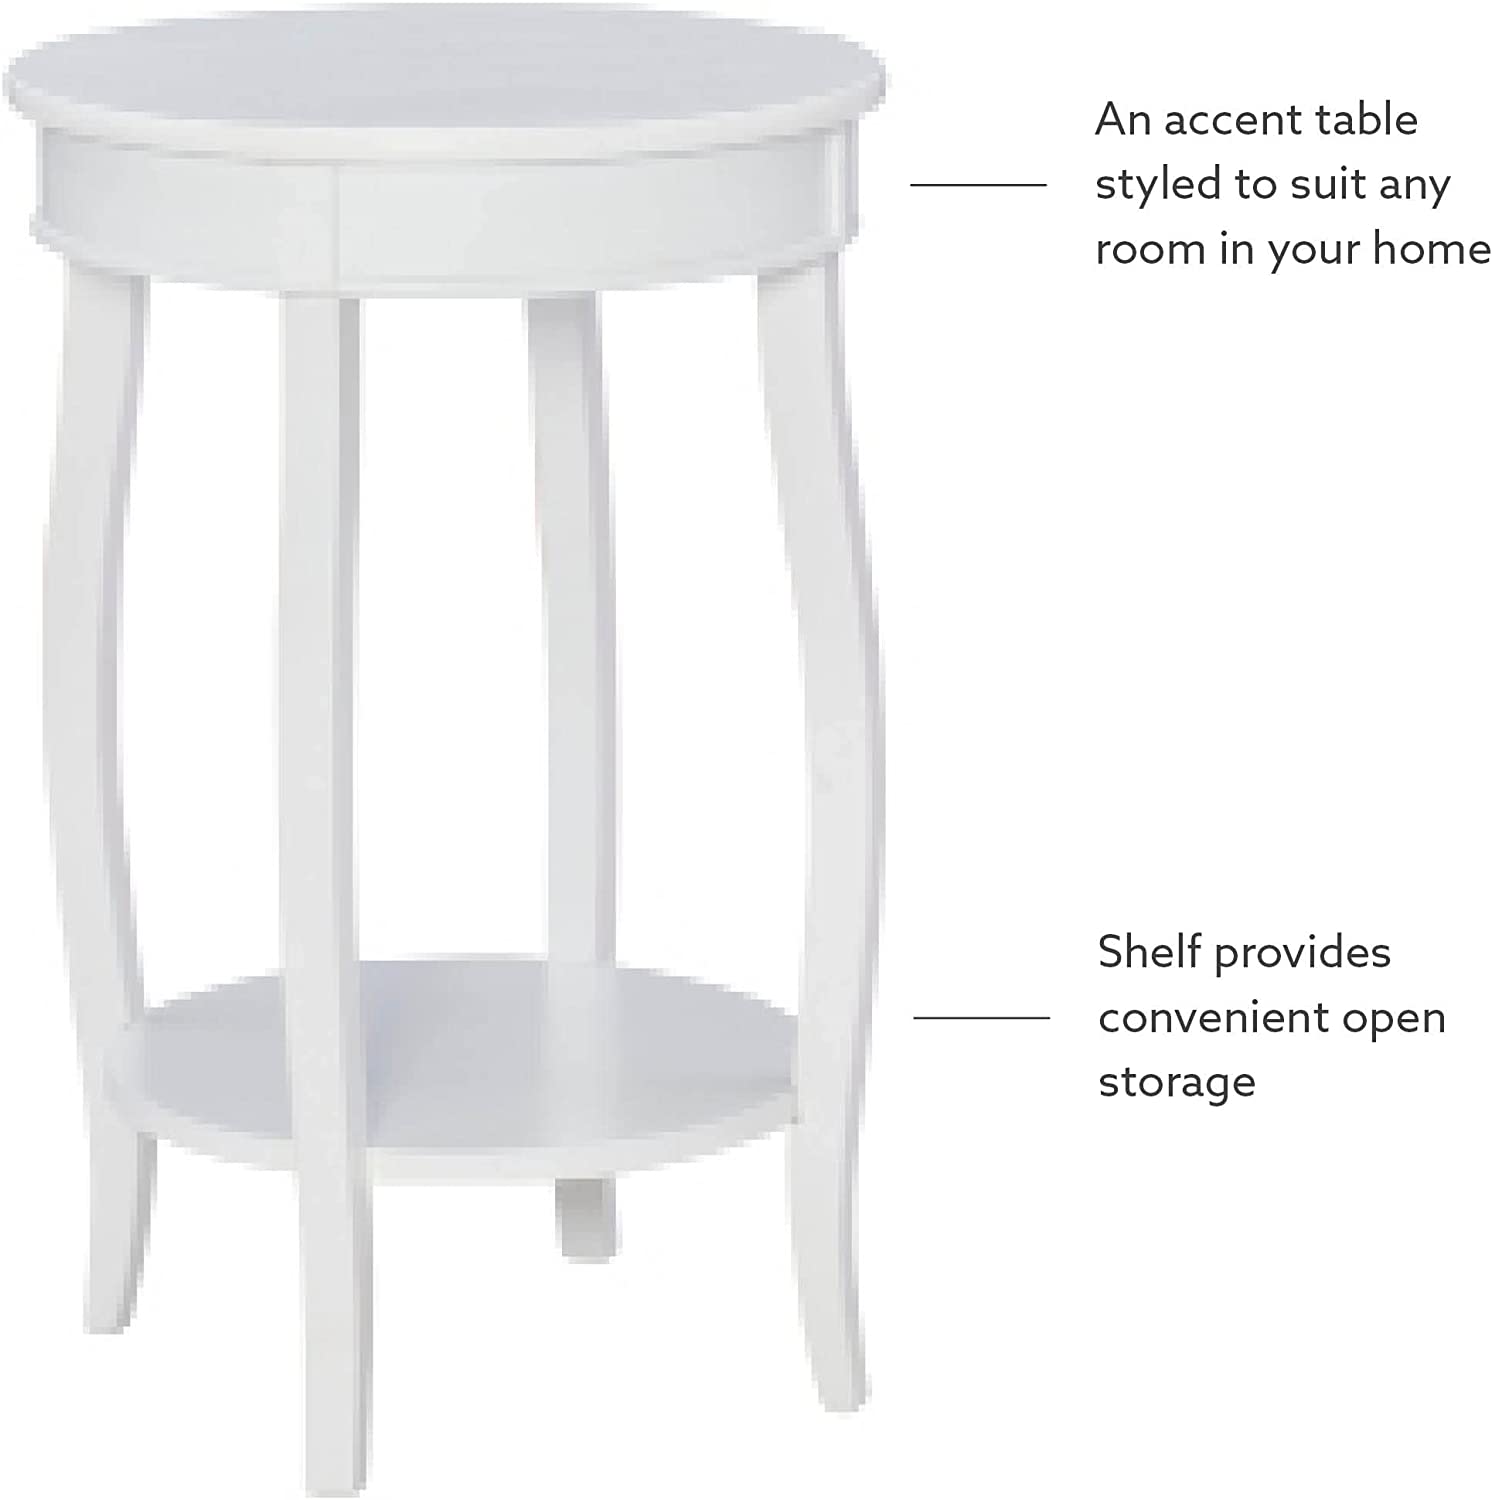 Powell Furniture Powell Round Shelf, Silver Table,